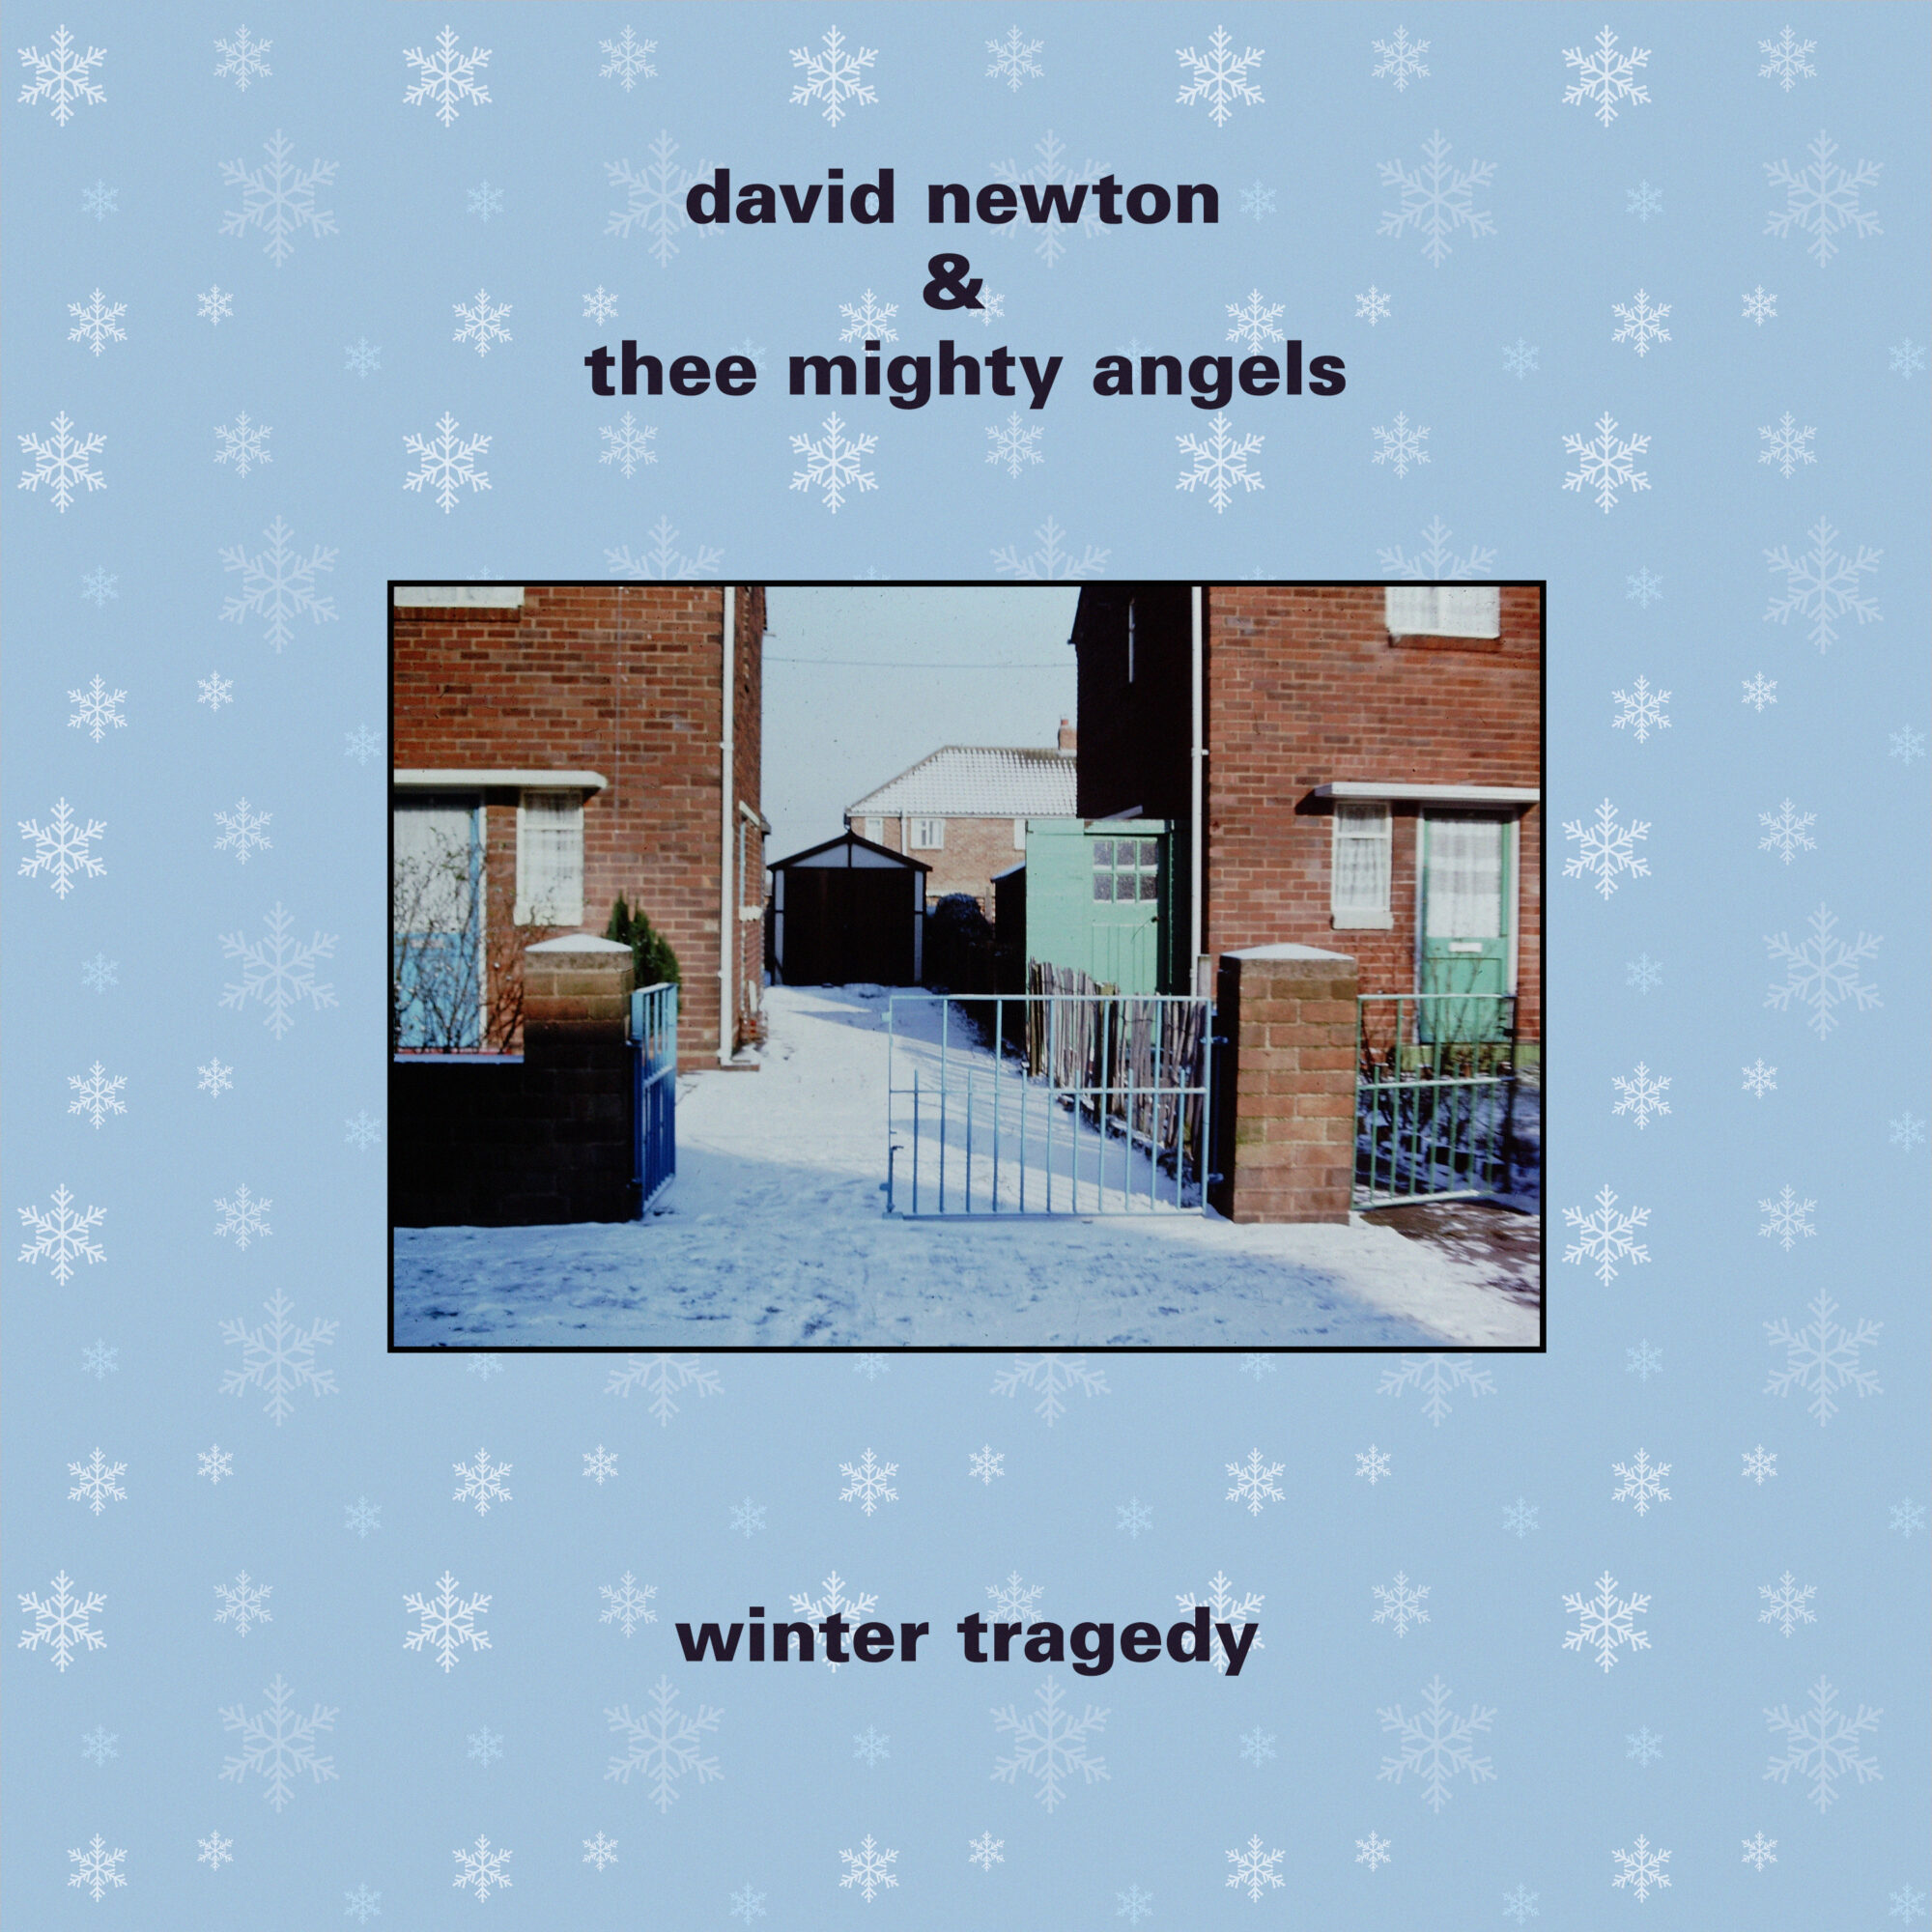 News – David Newton & Thee Mighty Angels – Winter Tragedy